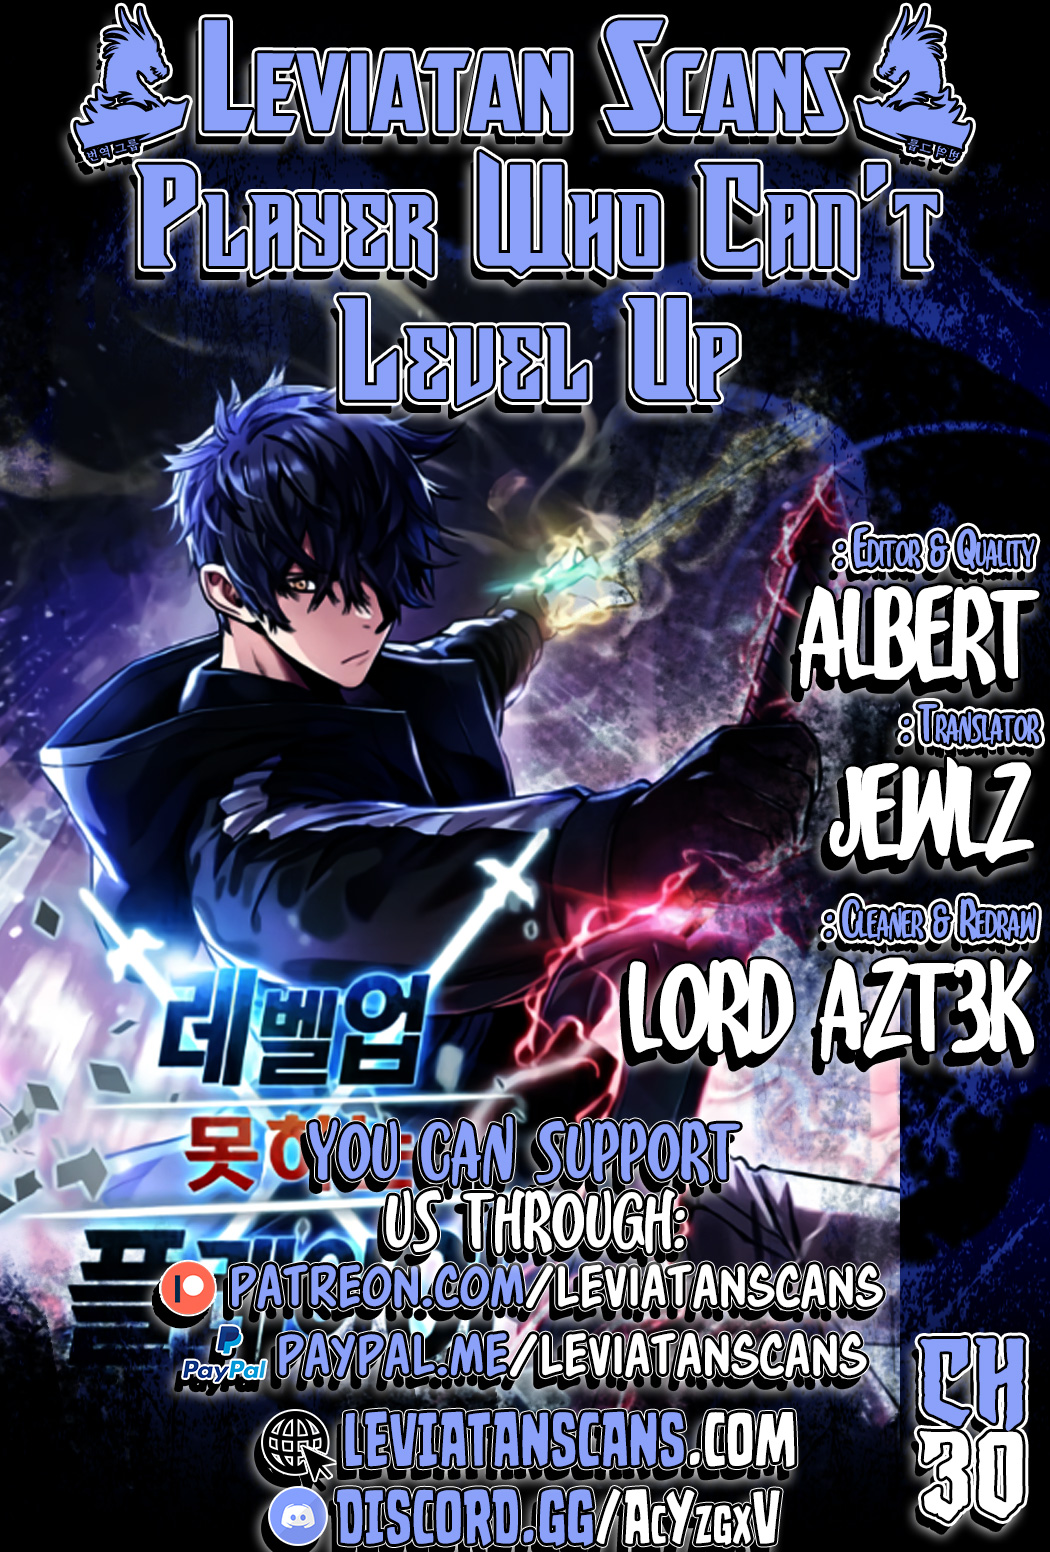 The Player That Can't Level Up - Chapter 3385 - Image 1